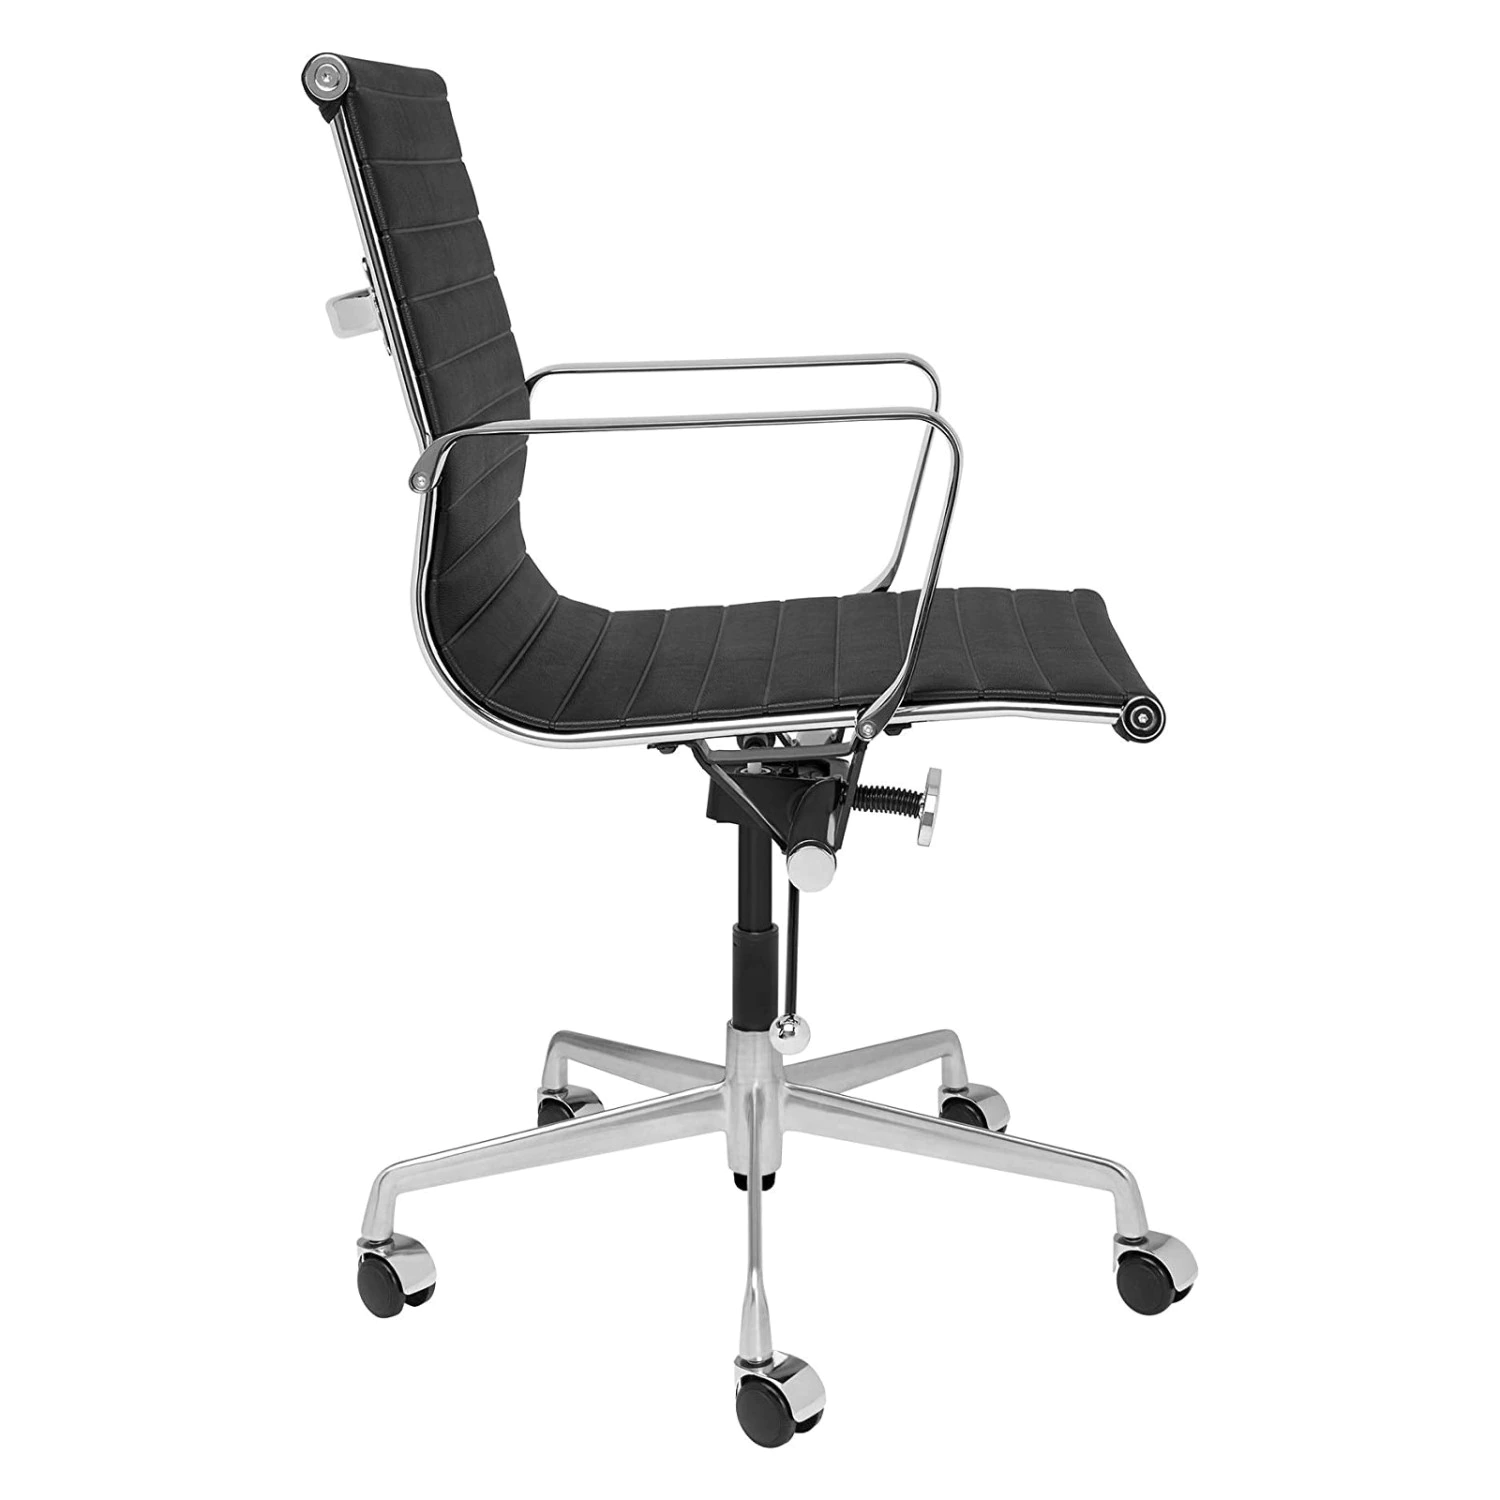 Office Gaming Chair